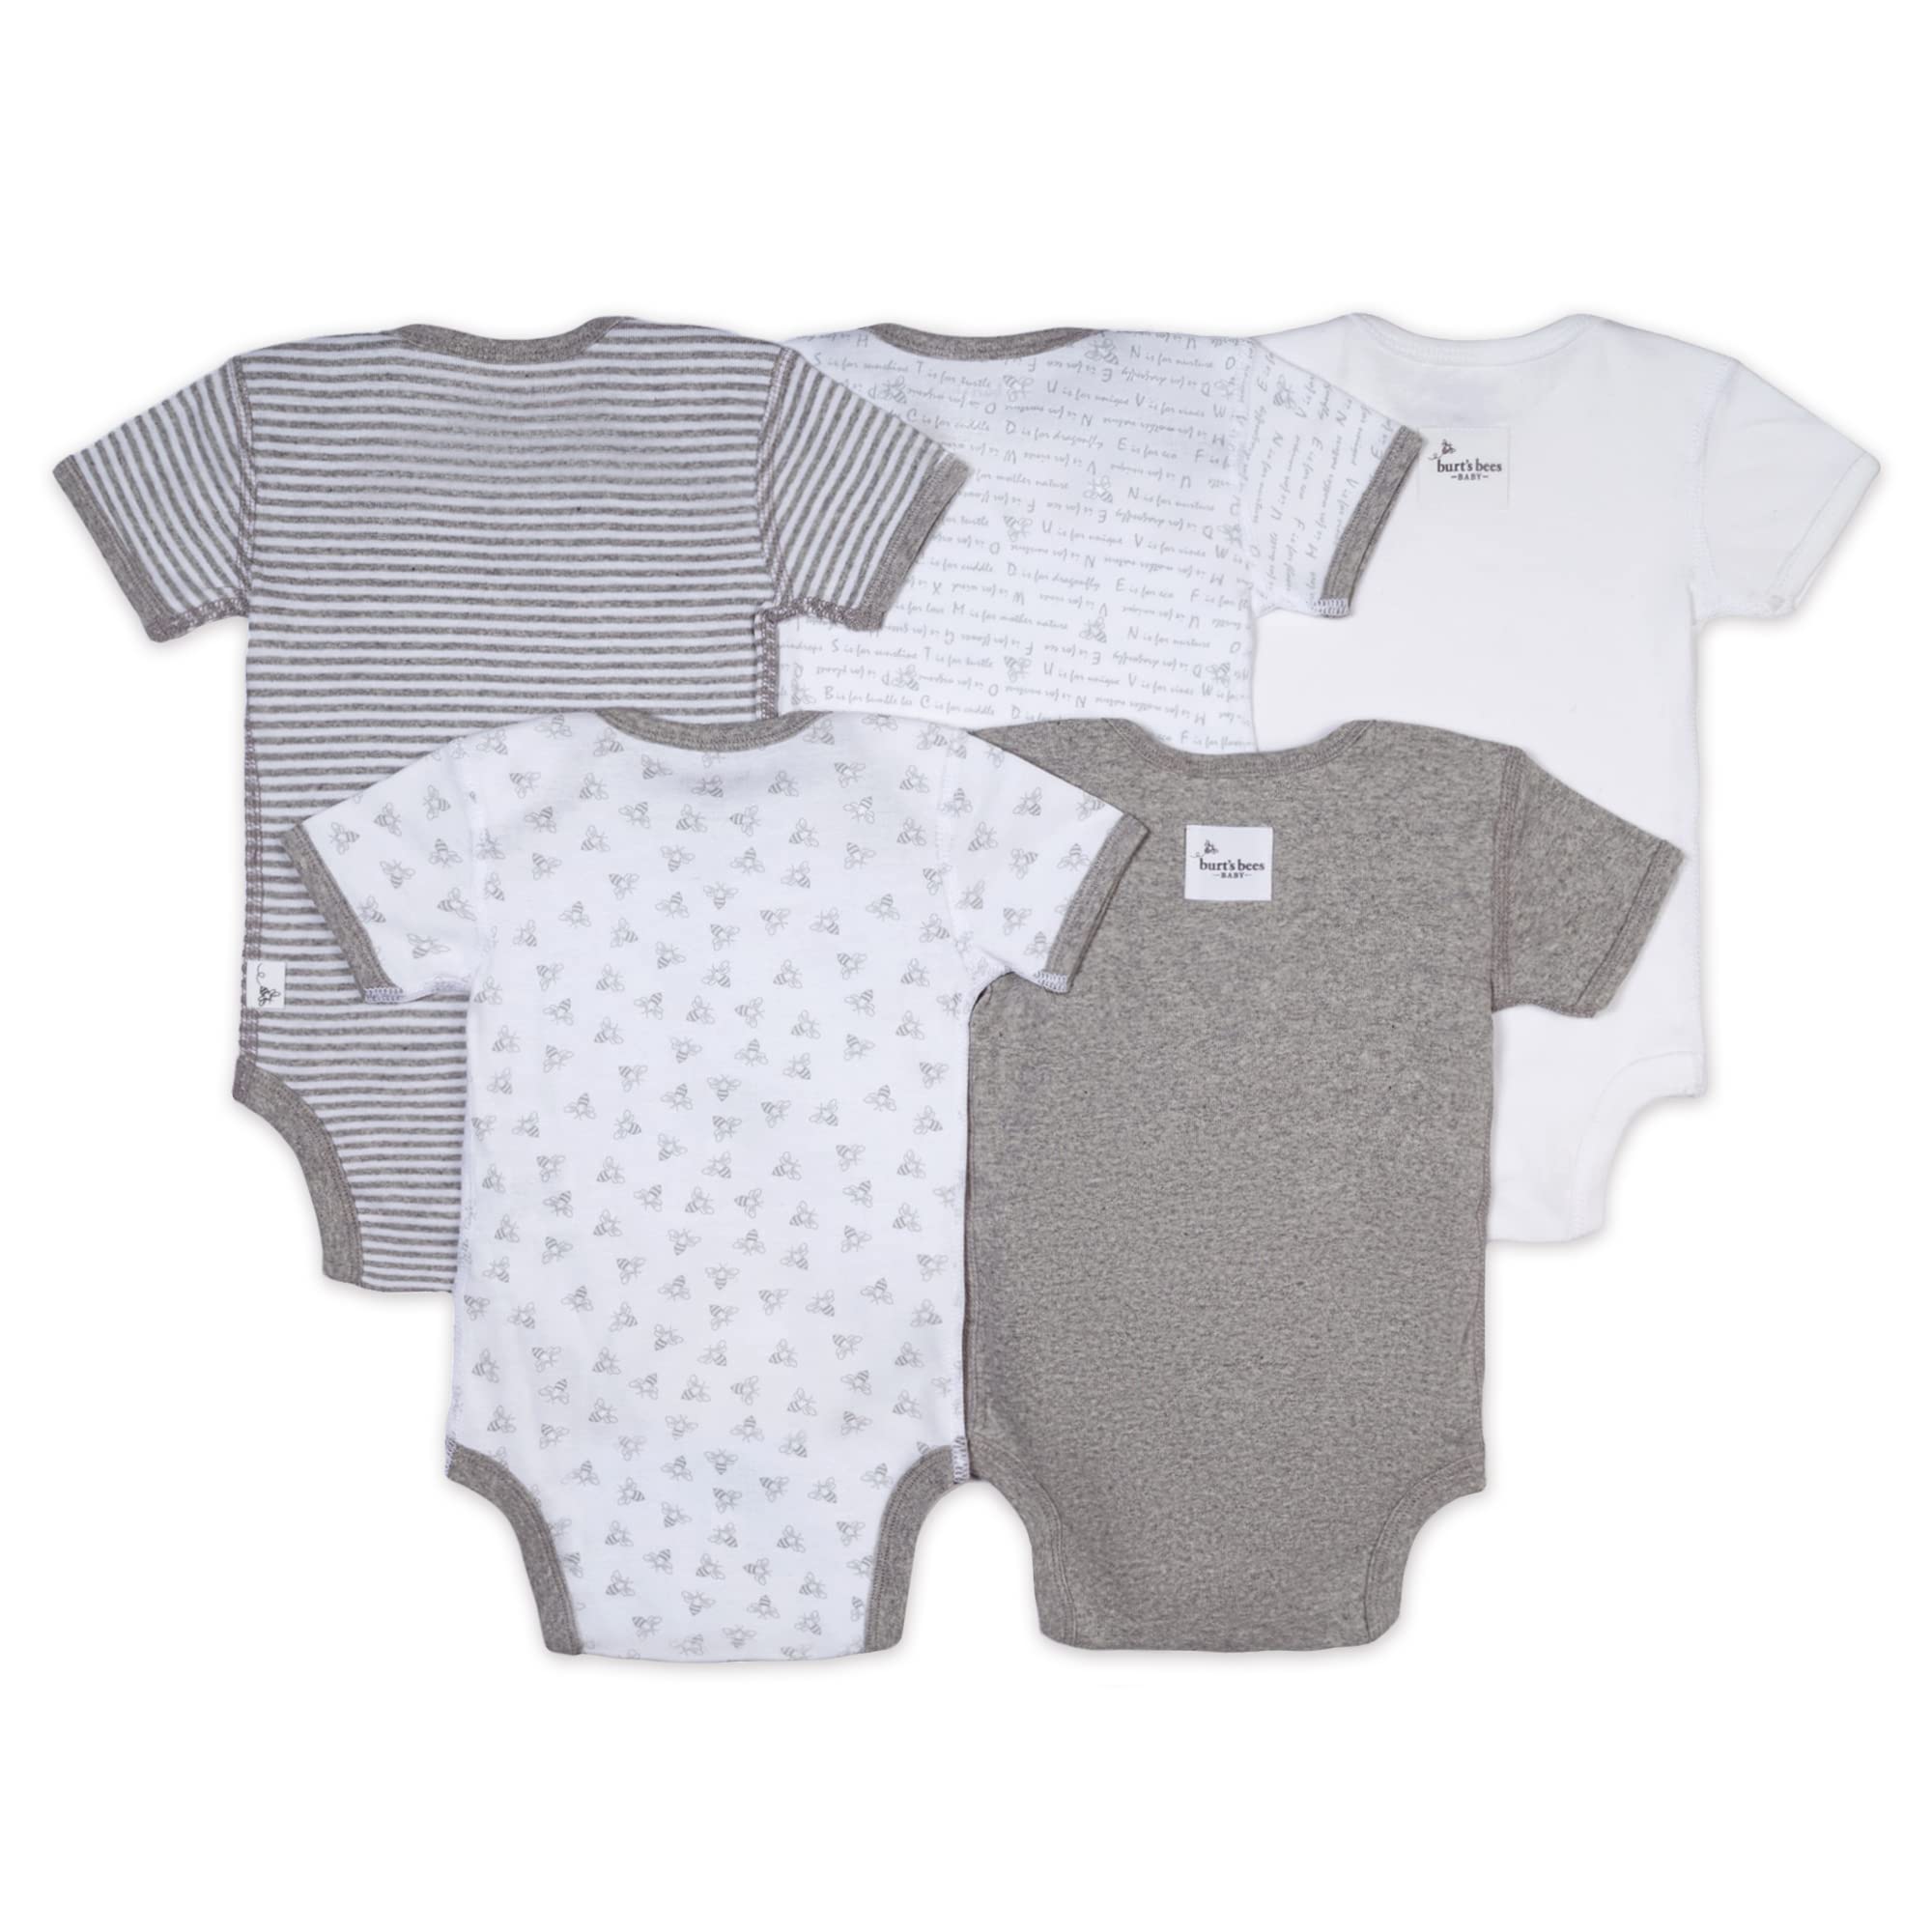 Burt's Bees Baby baby-boys Bodysuits, 5-pack Short & Long Sleeve One-pieces, 100% Organic Cotton